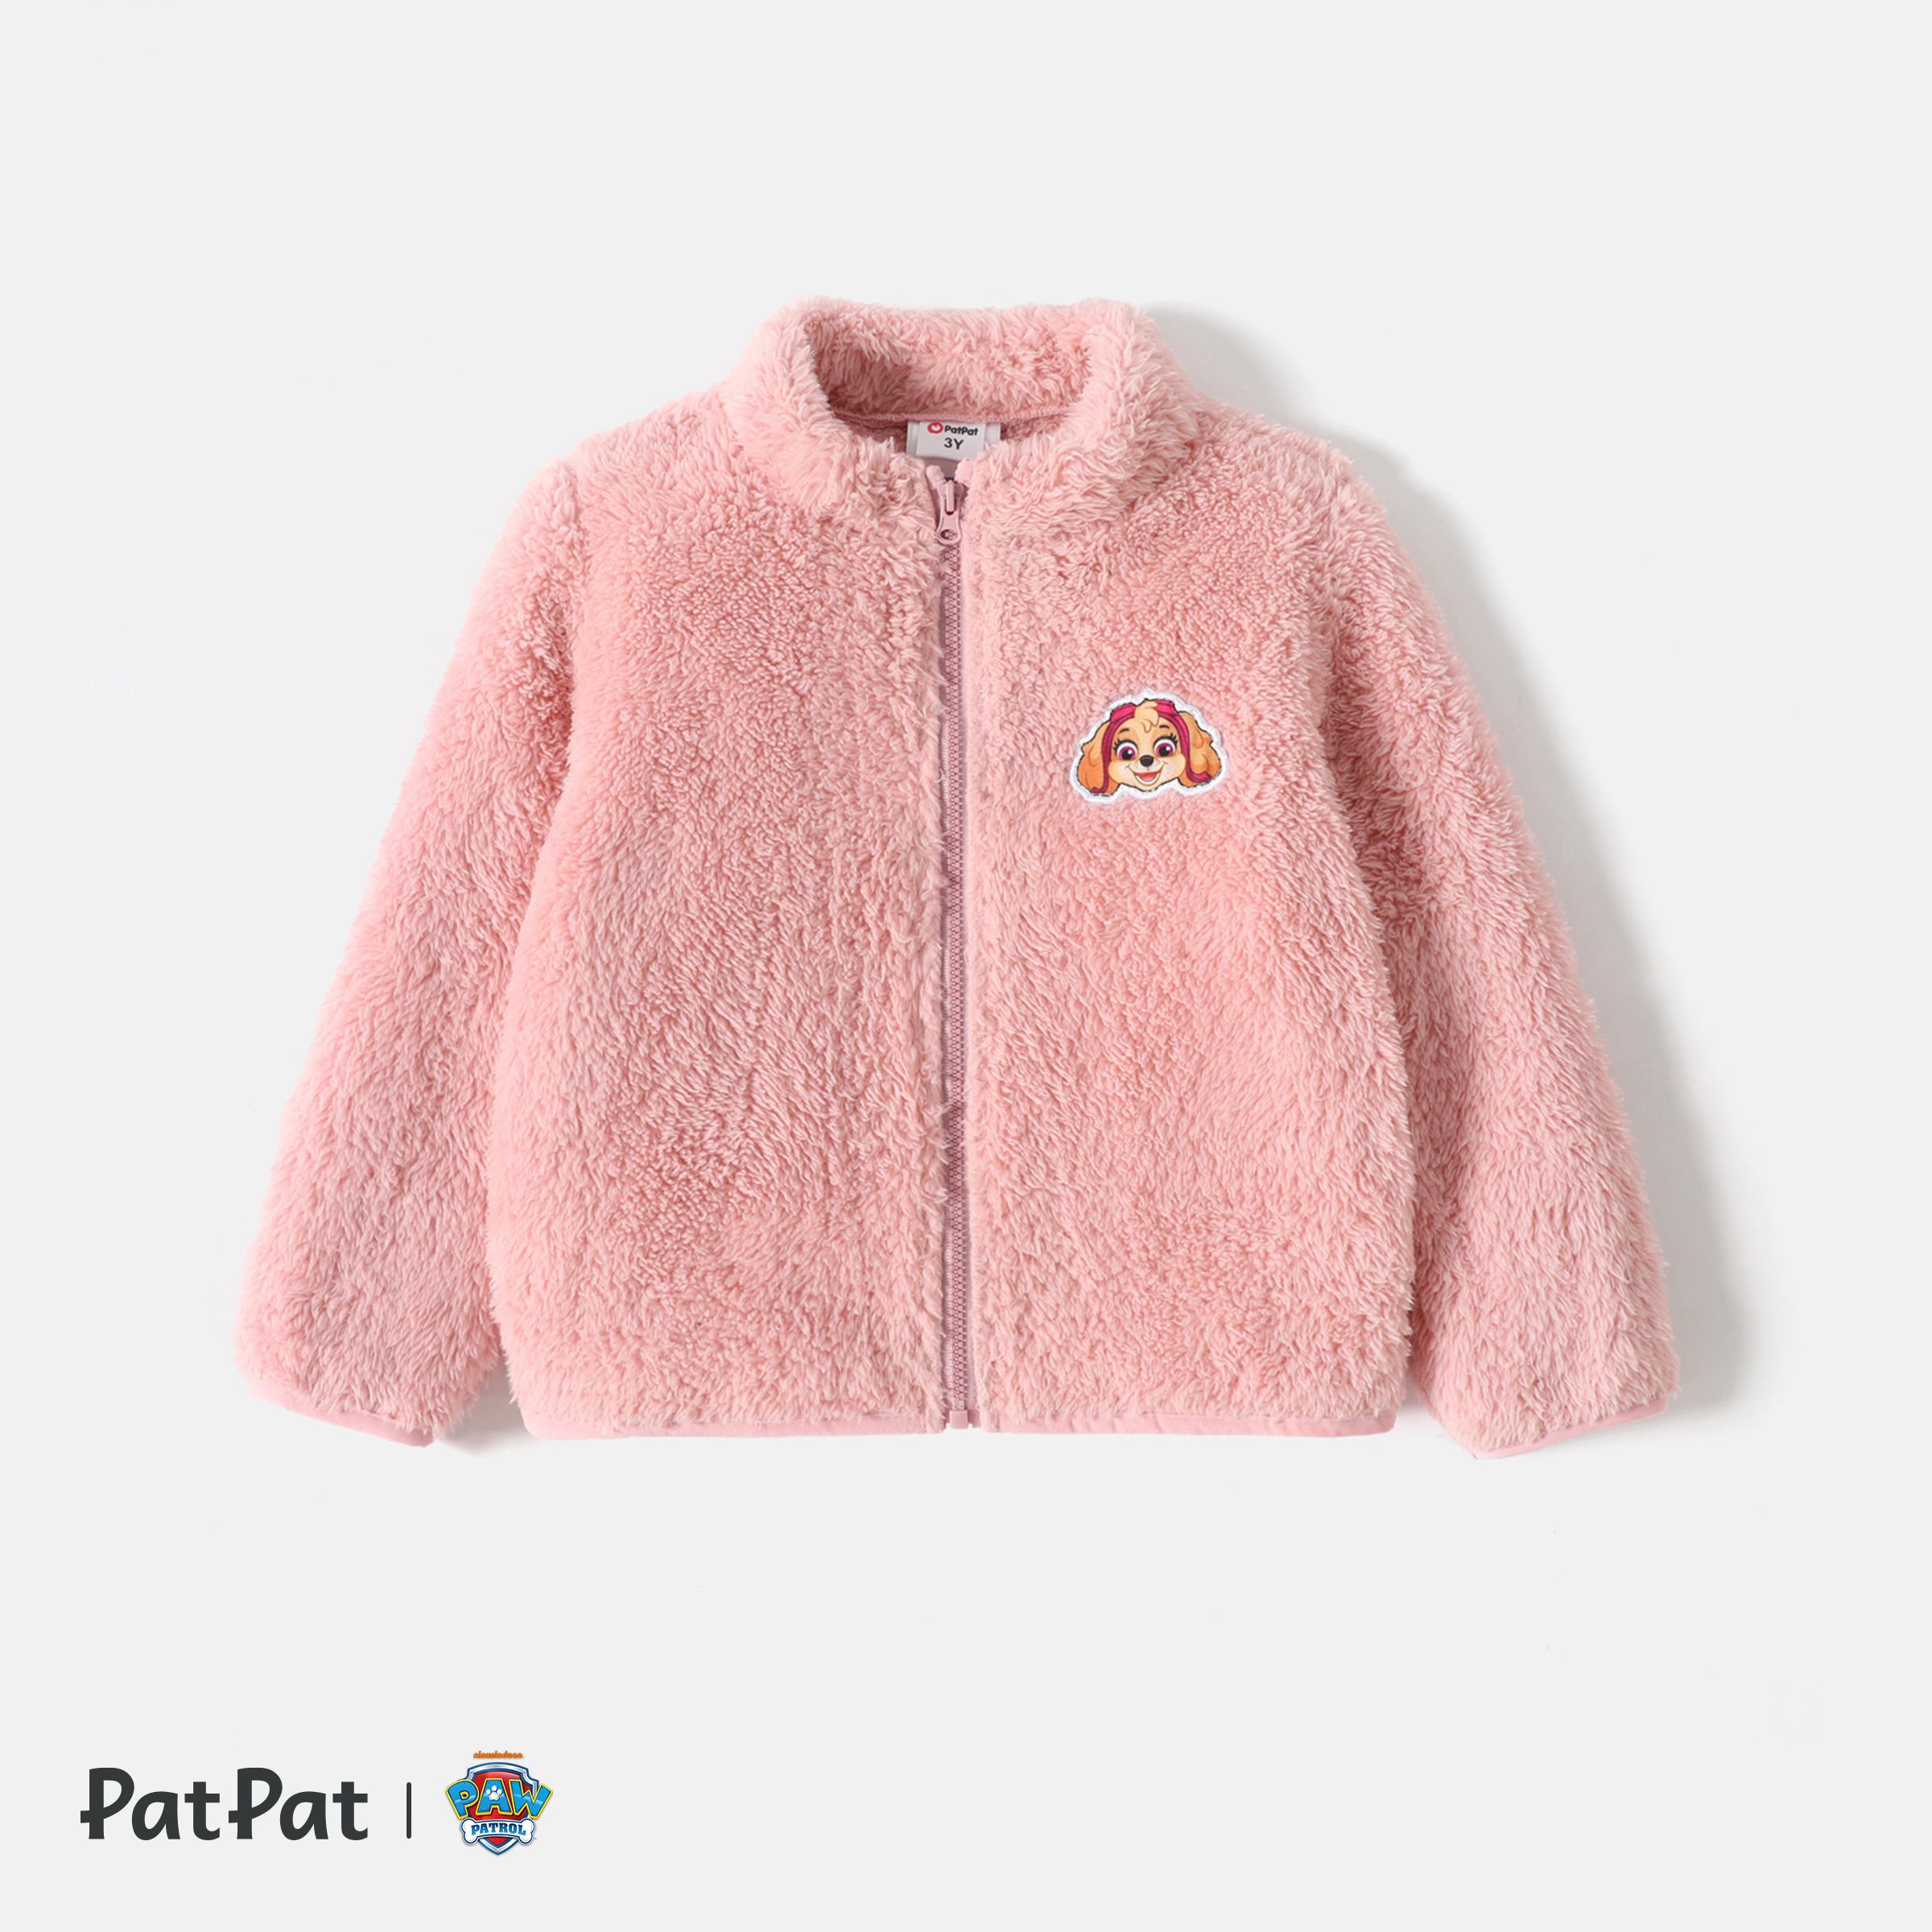 PAW Patrol Toddler Girl/Boy Patch Embroidered Fuzzy Fleece Jacket